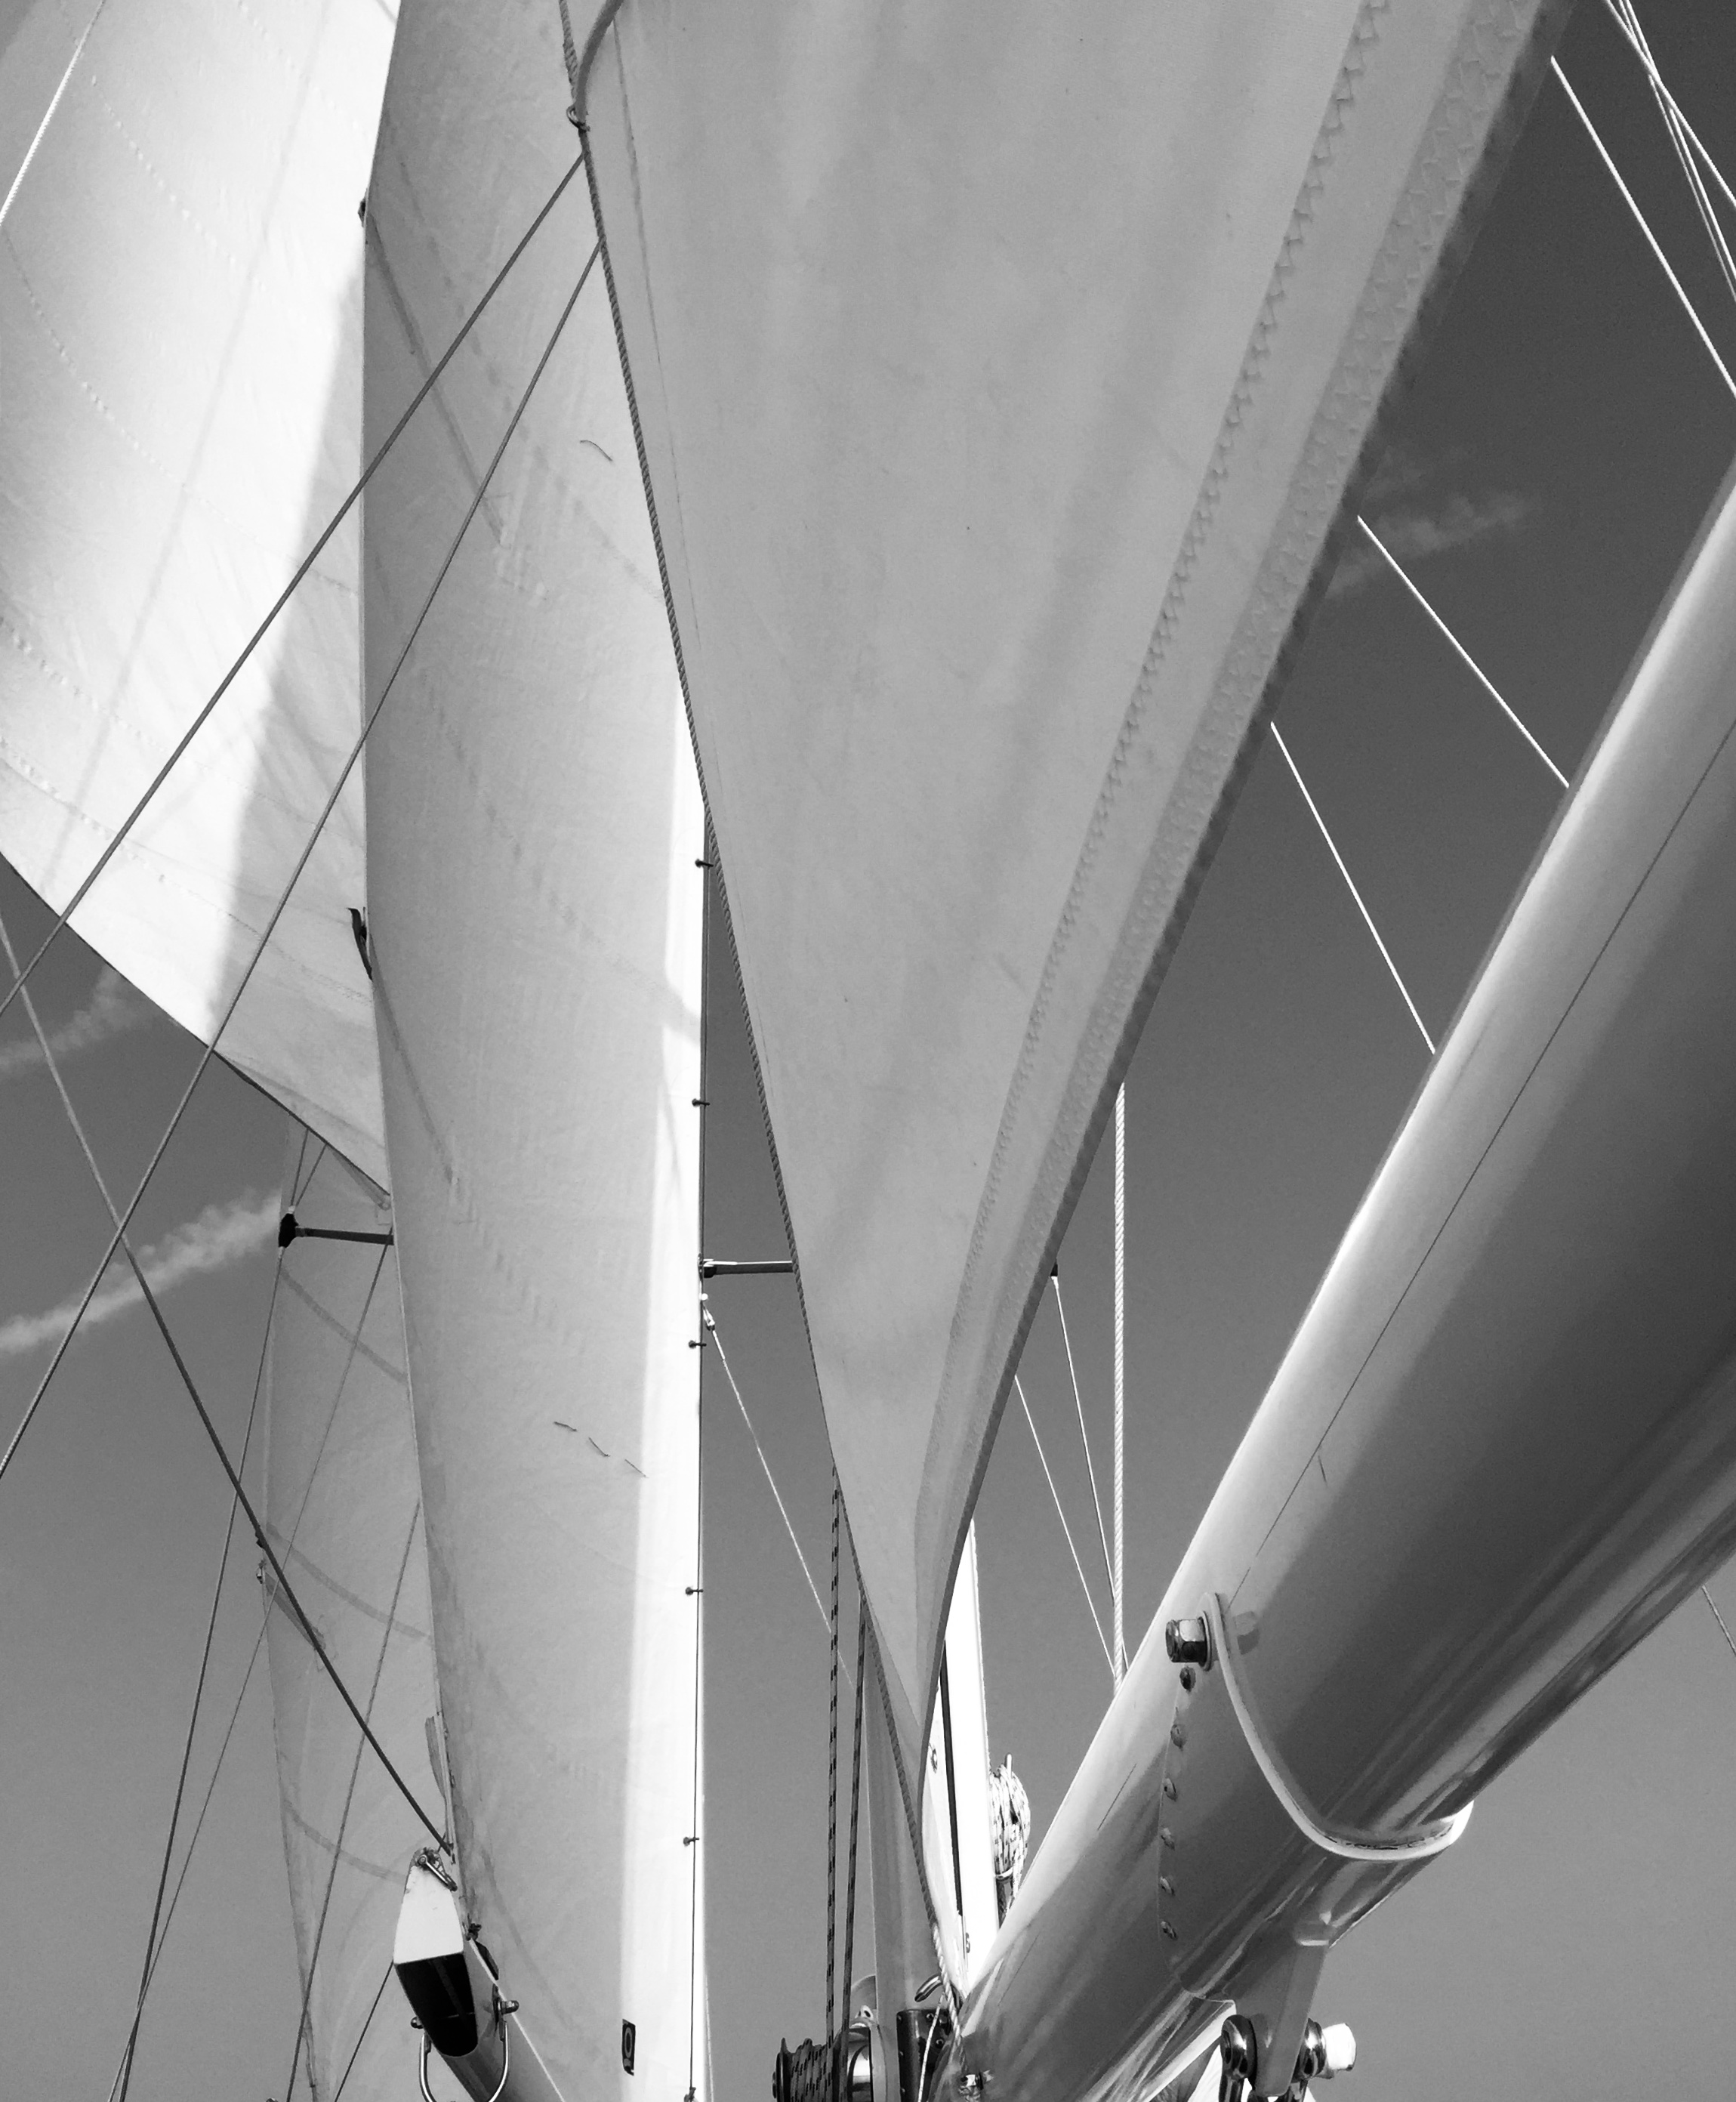 Black and white sails and rigging looking up at the sky